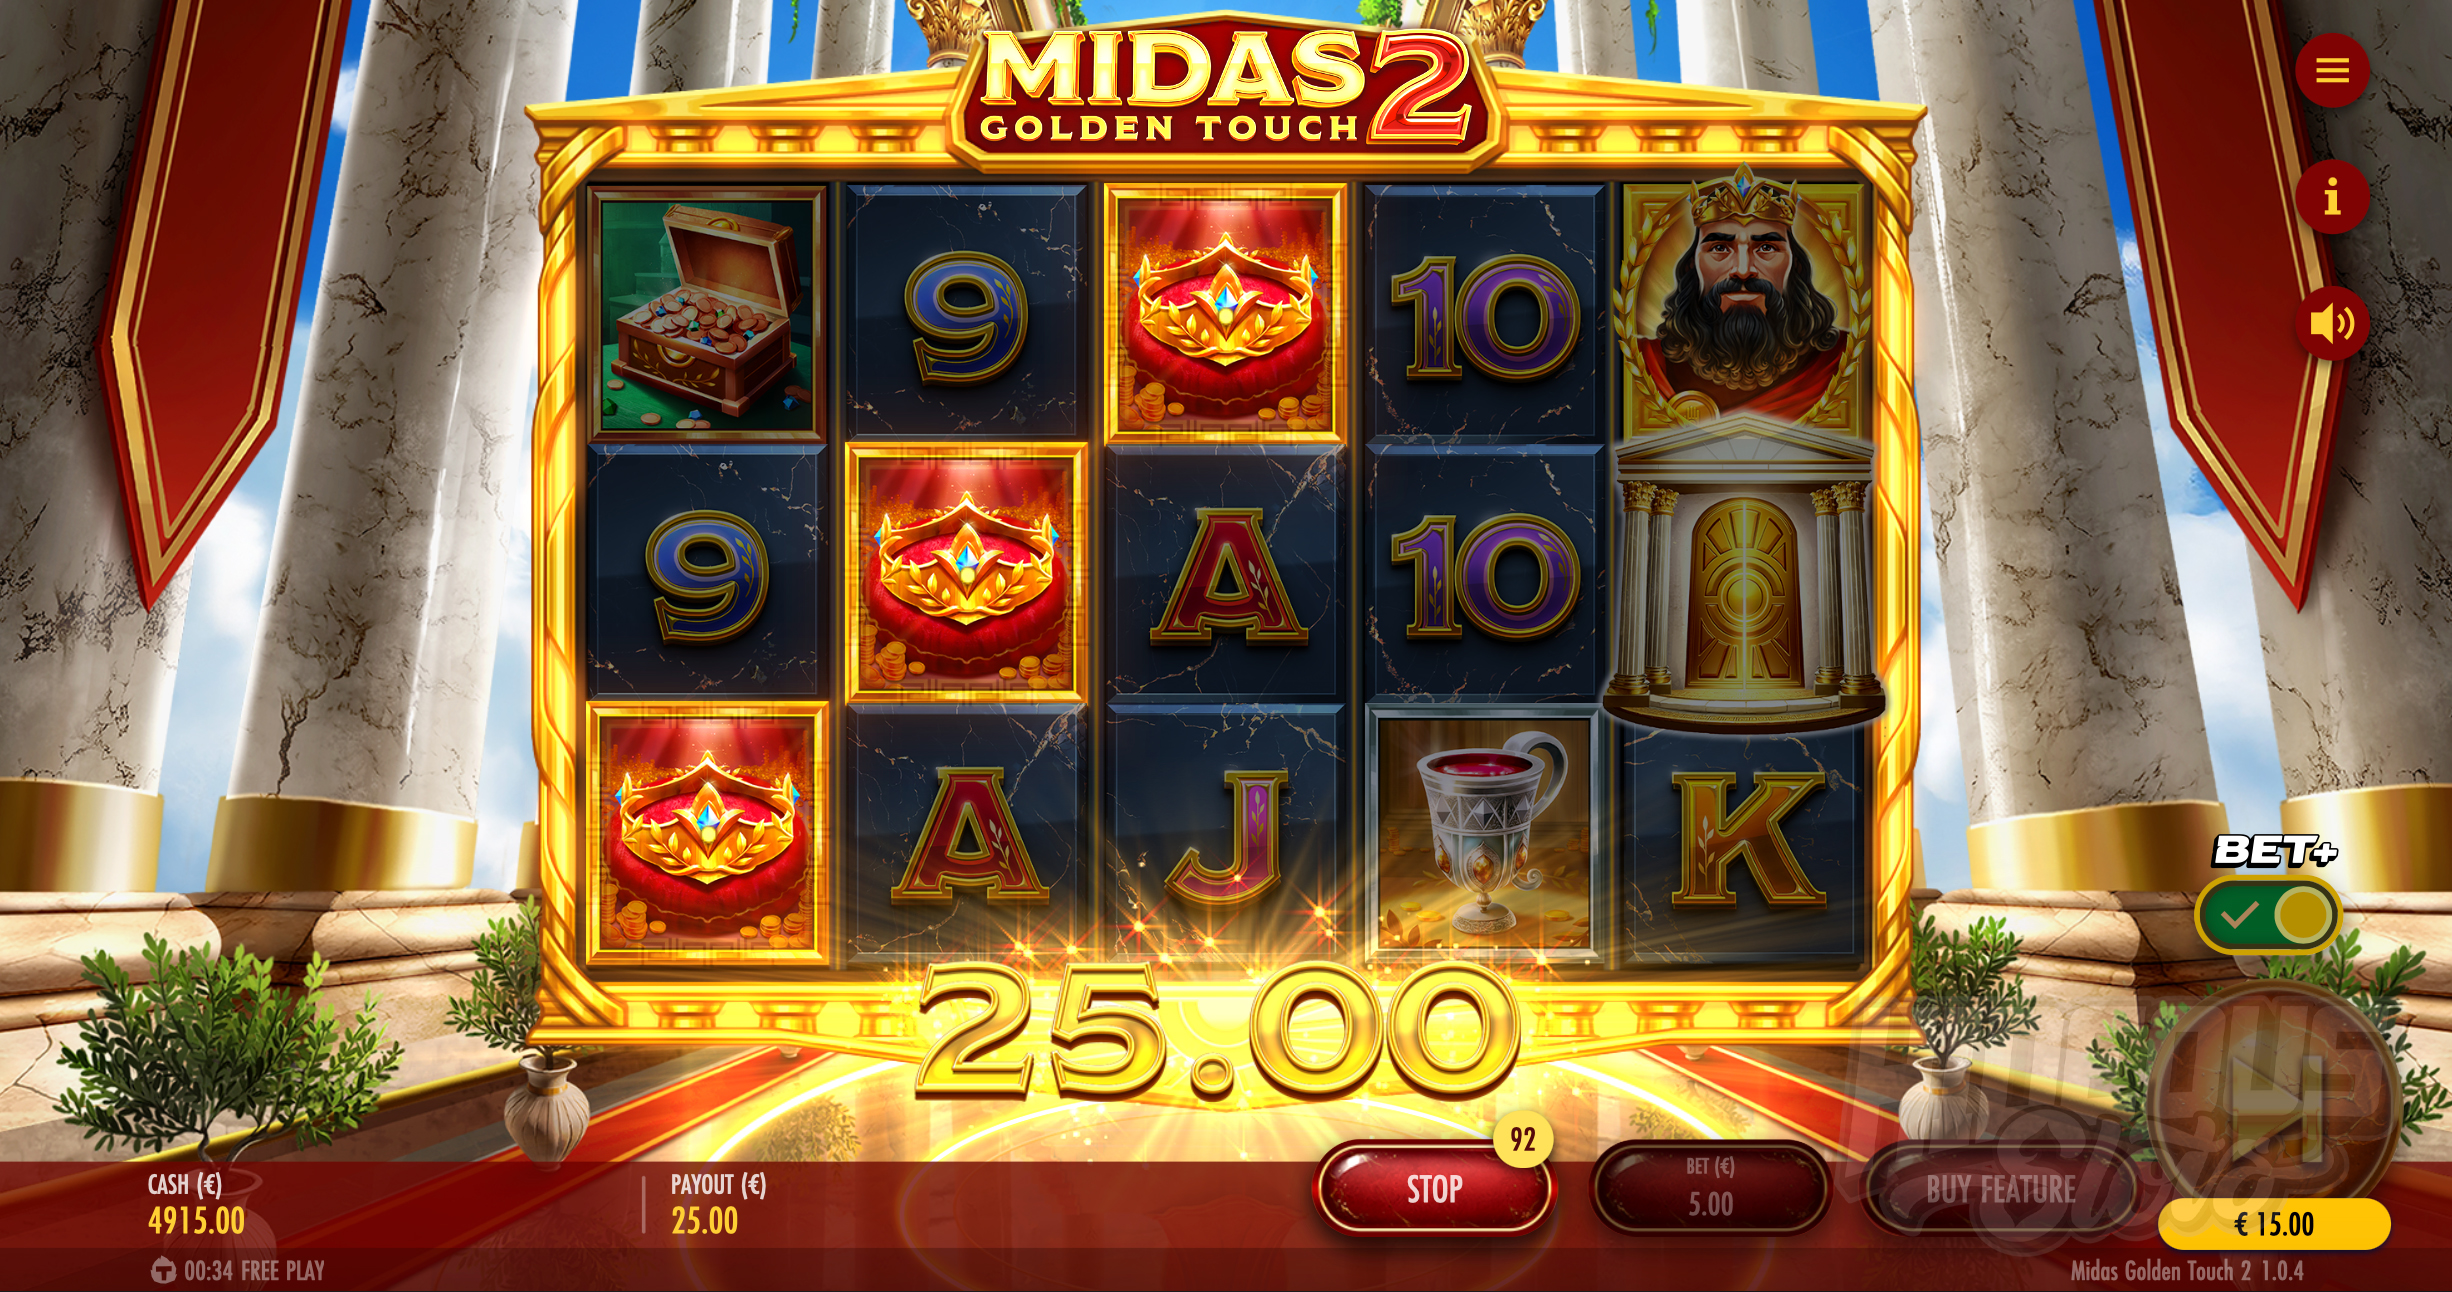 Midas Golden Touch 2 Offers Players 15 Fixed Win Lines